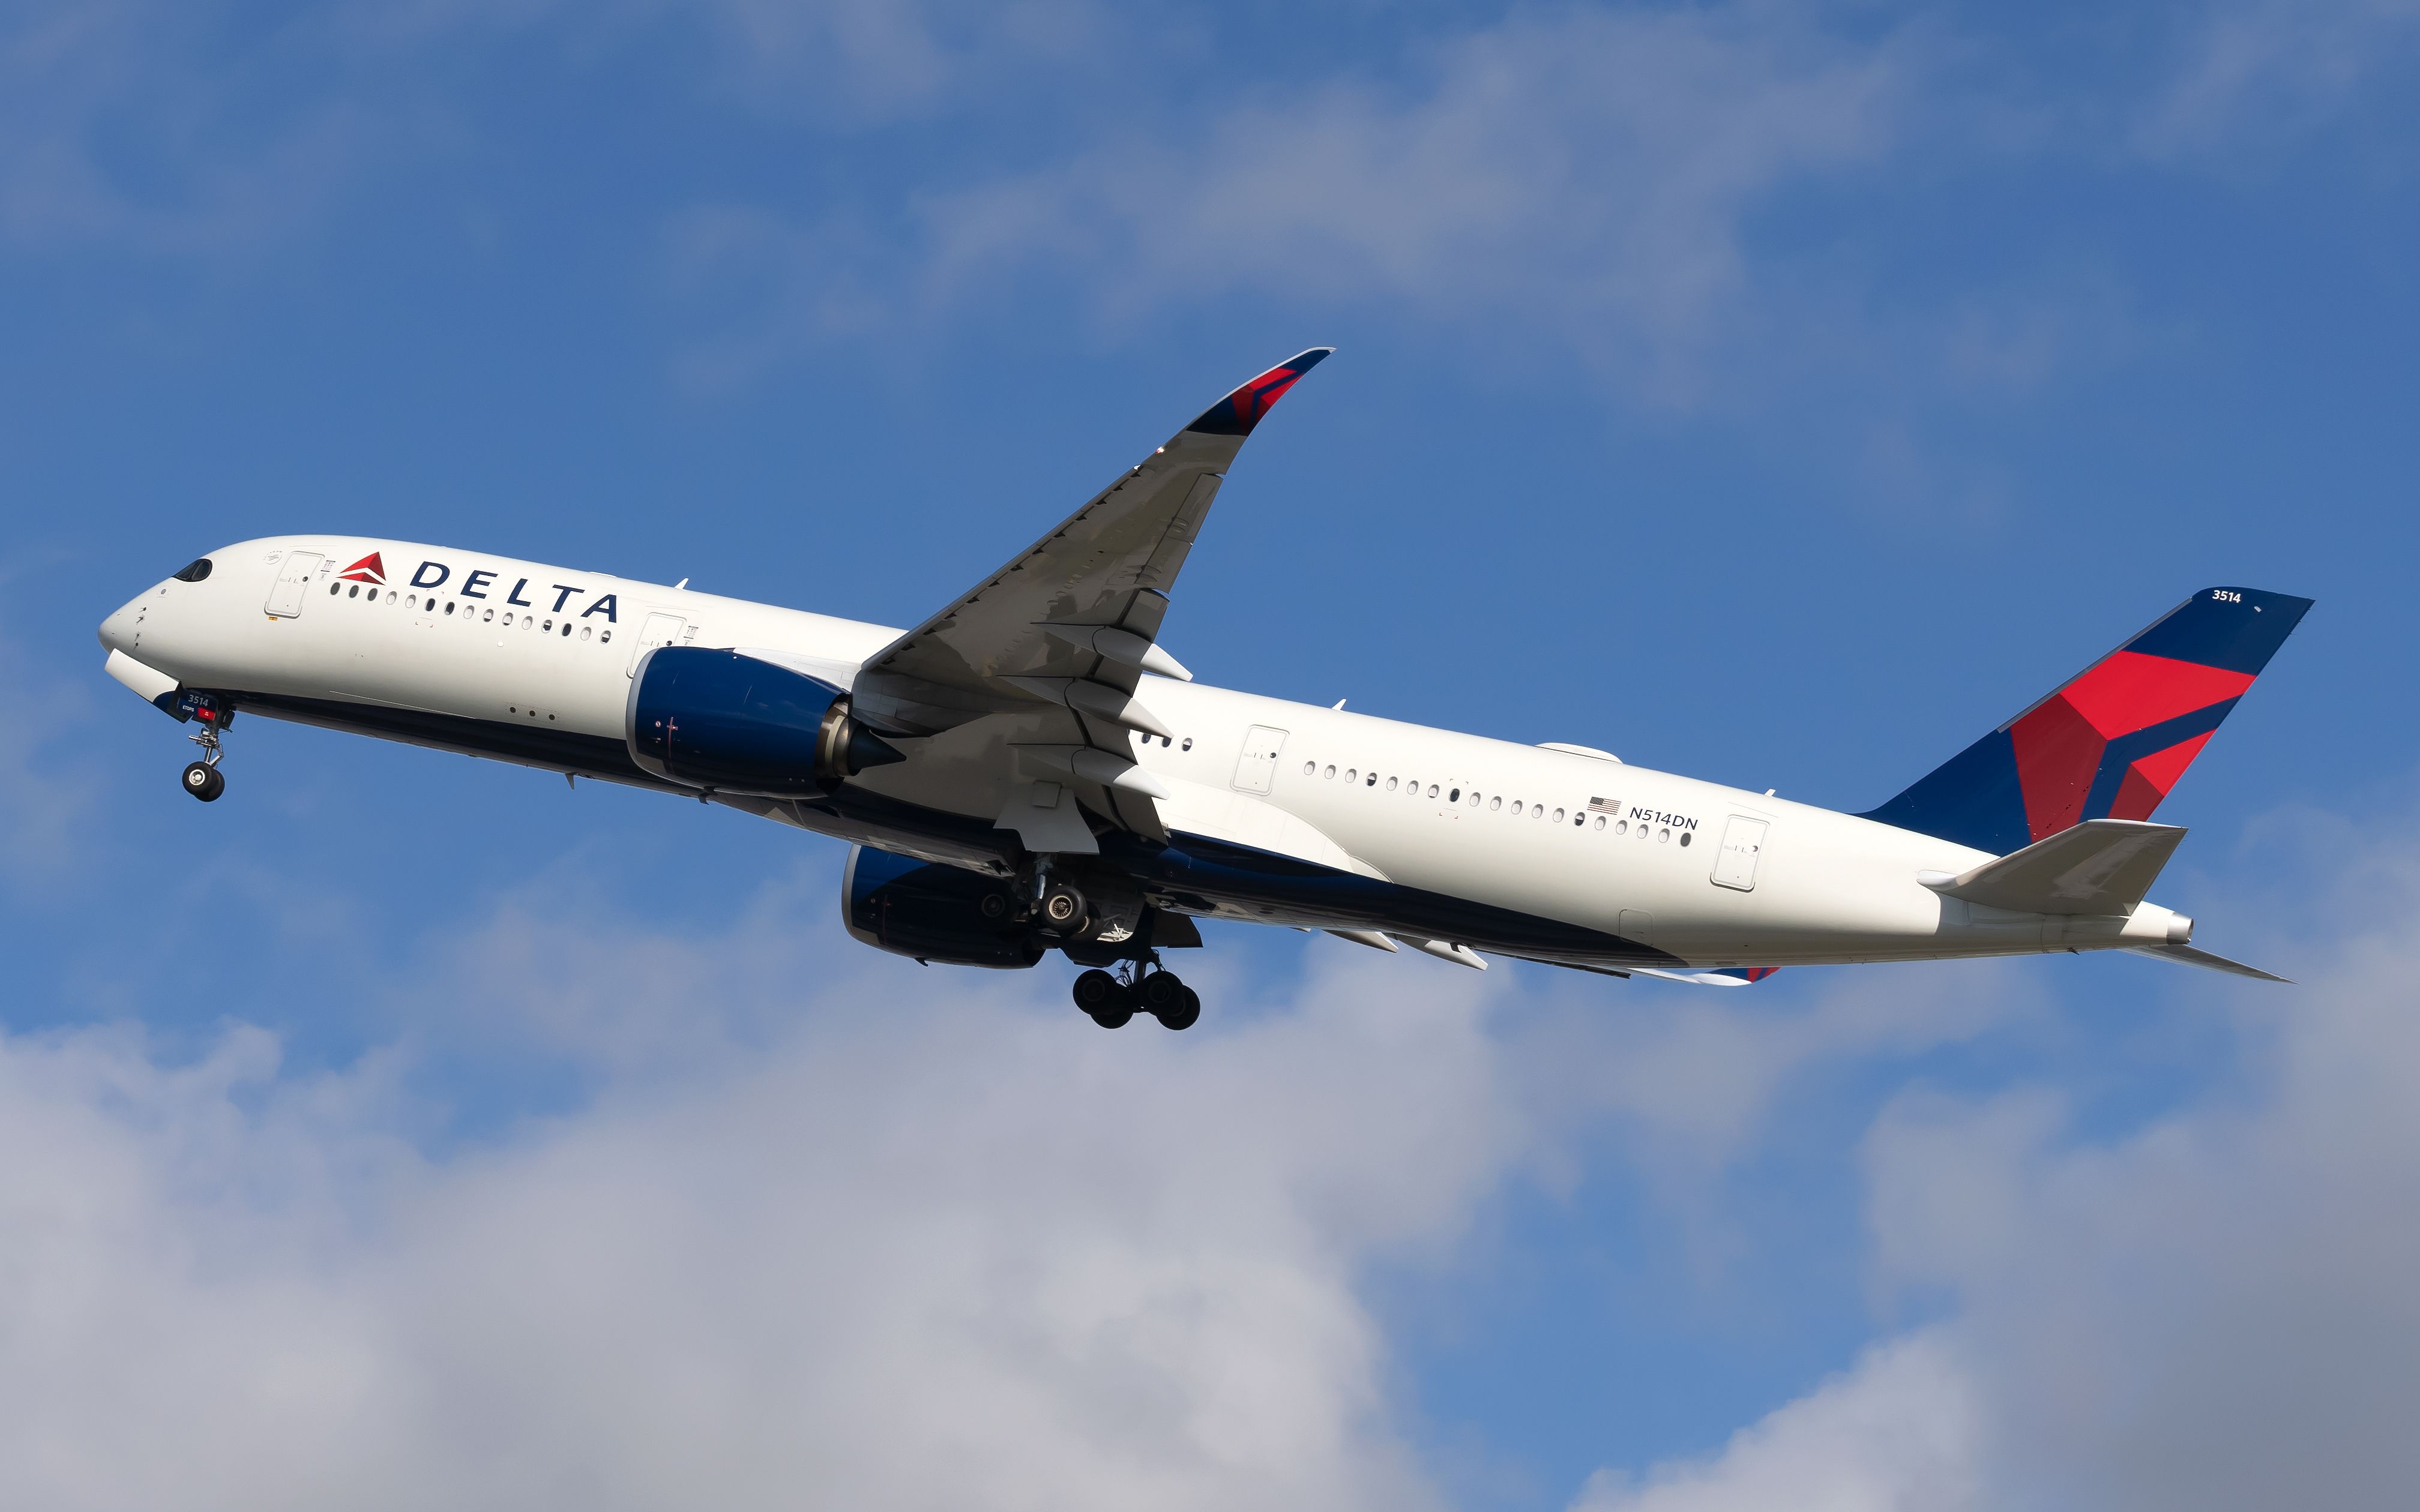 A Delta Air Lines Airbus A350-941 flying in the sky.